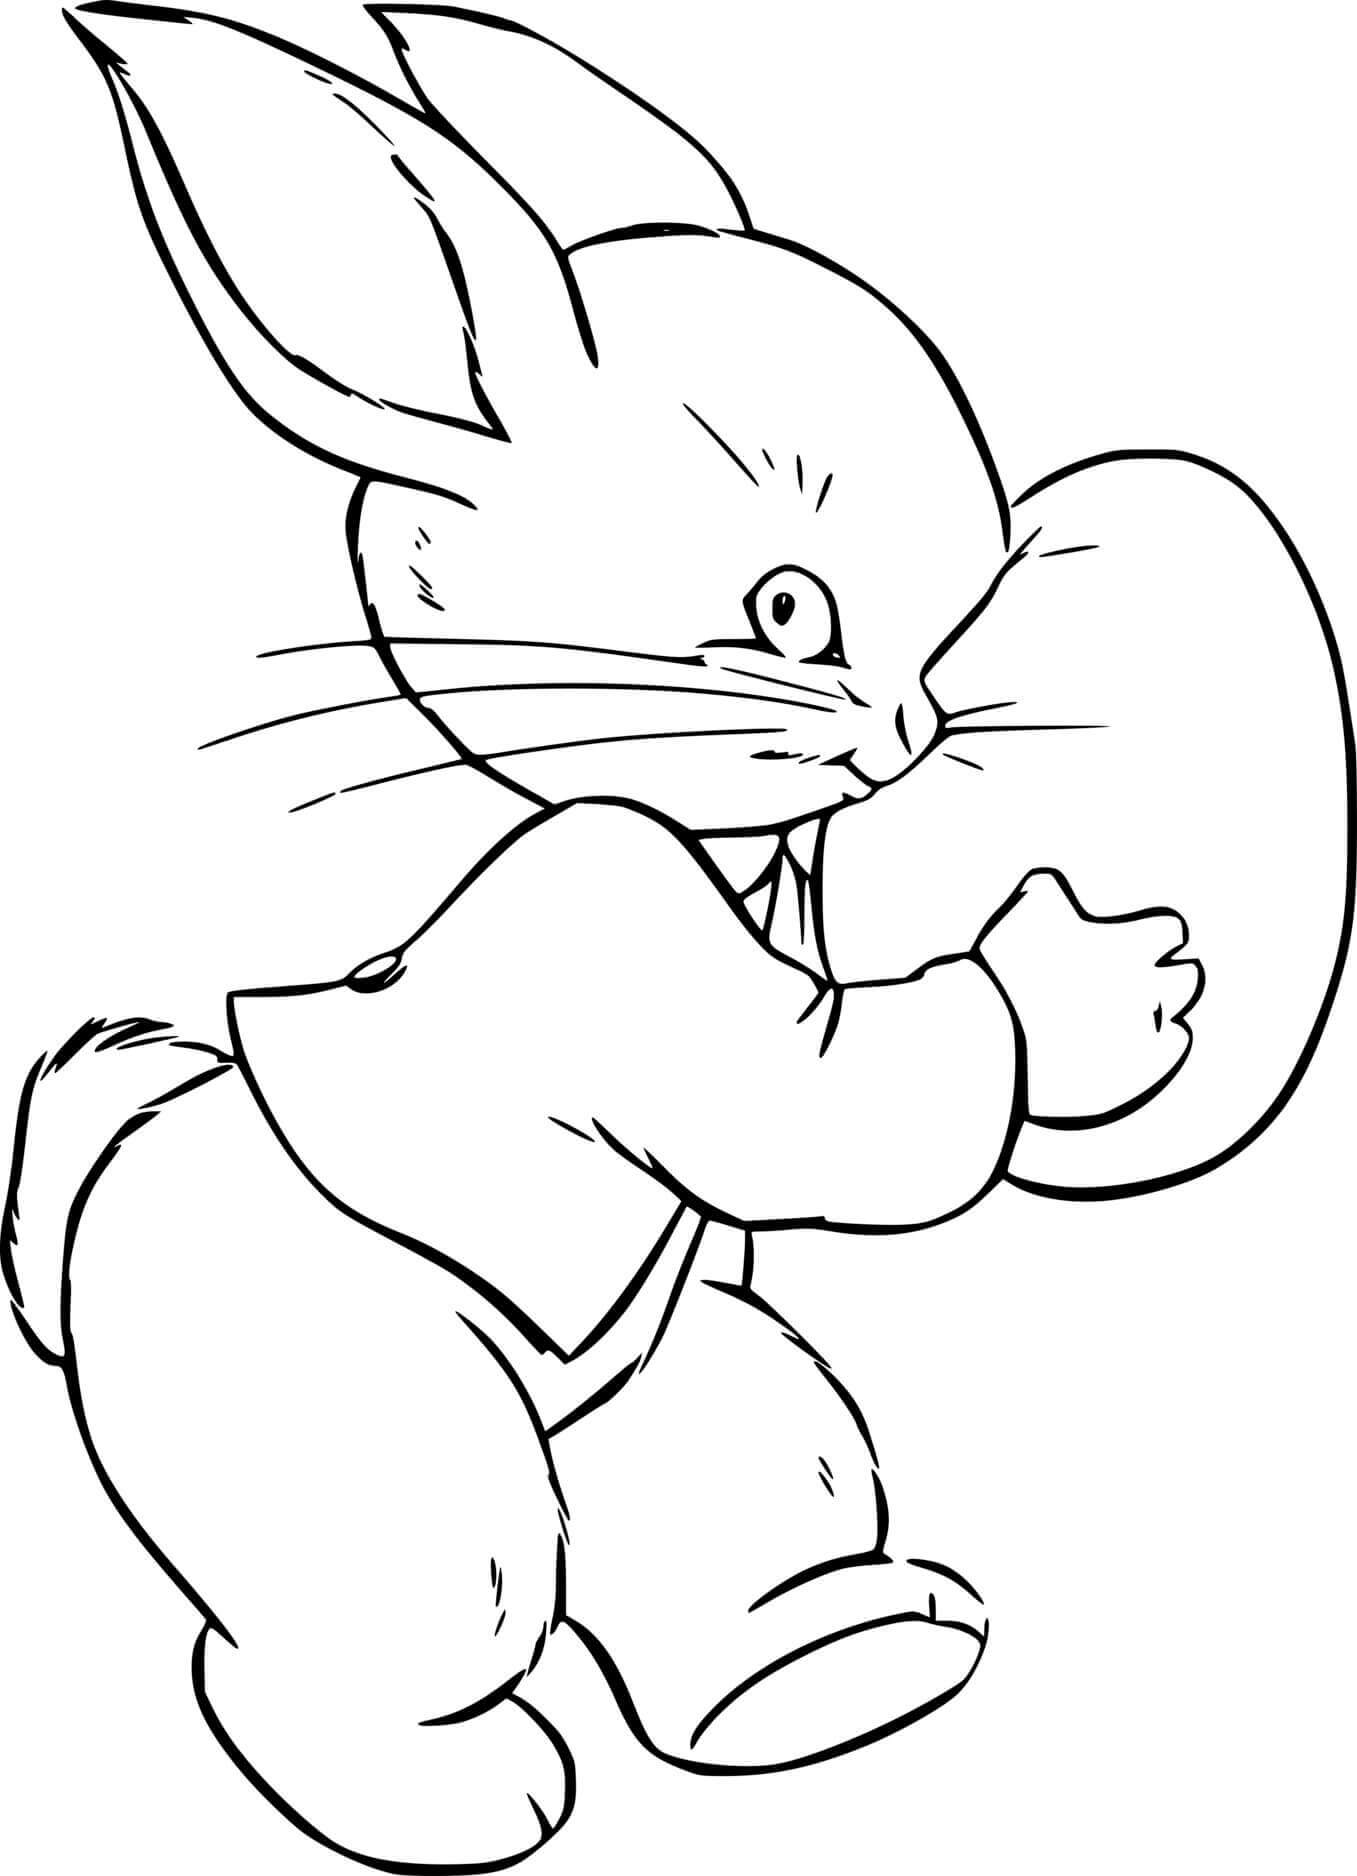 Easter Bunny Holds An Egg Coloring Page